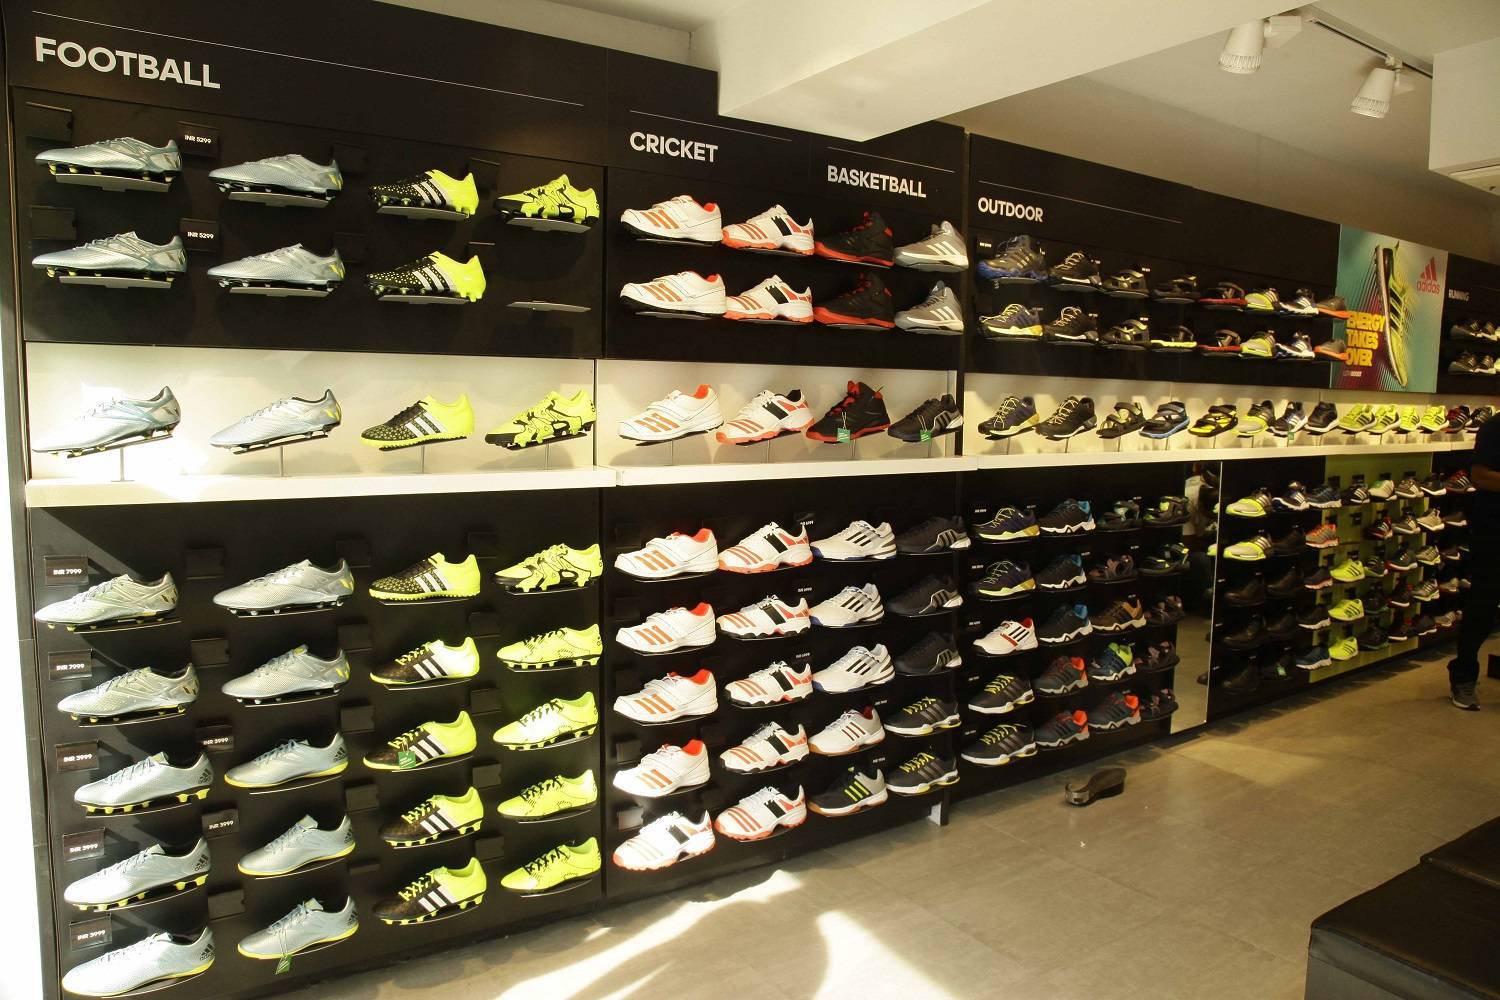 Adidas will open bigger stores in India 